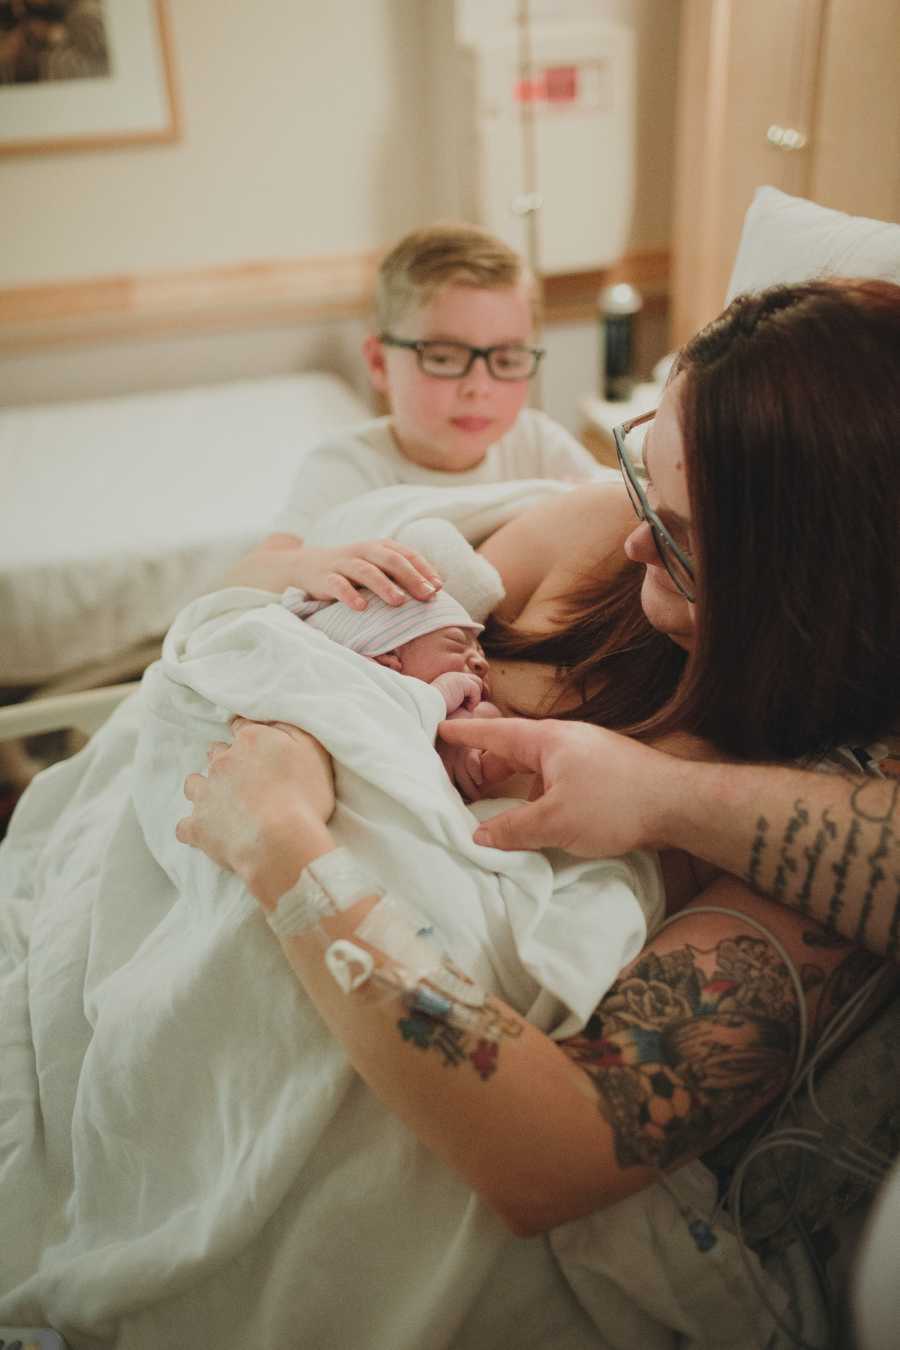 Mom does skin to skin with her newborn son after delivery